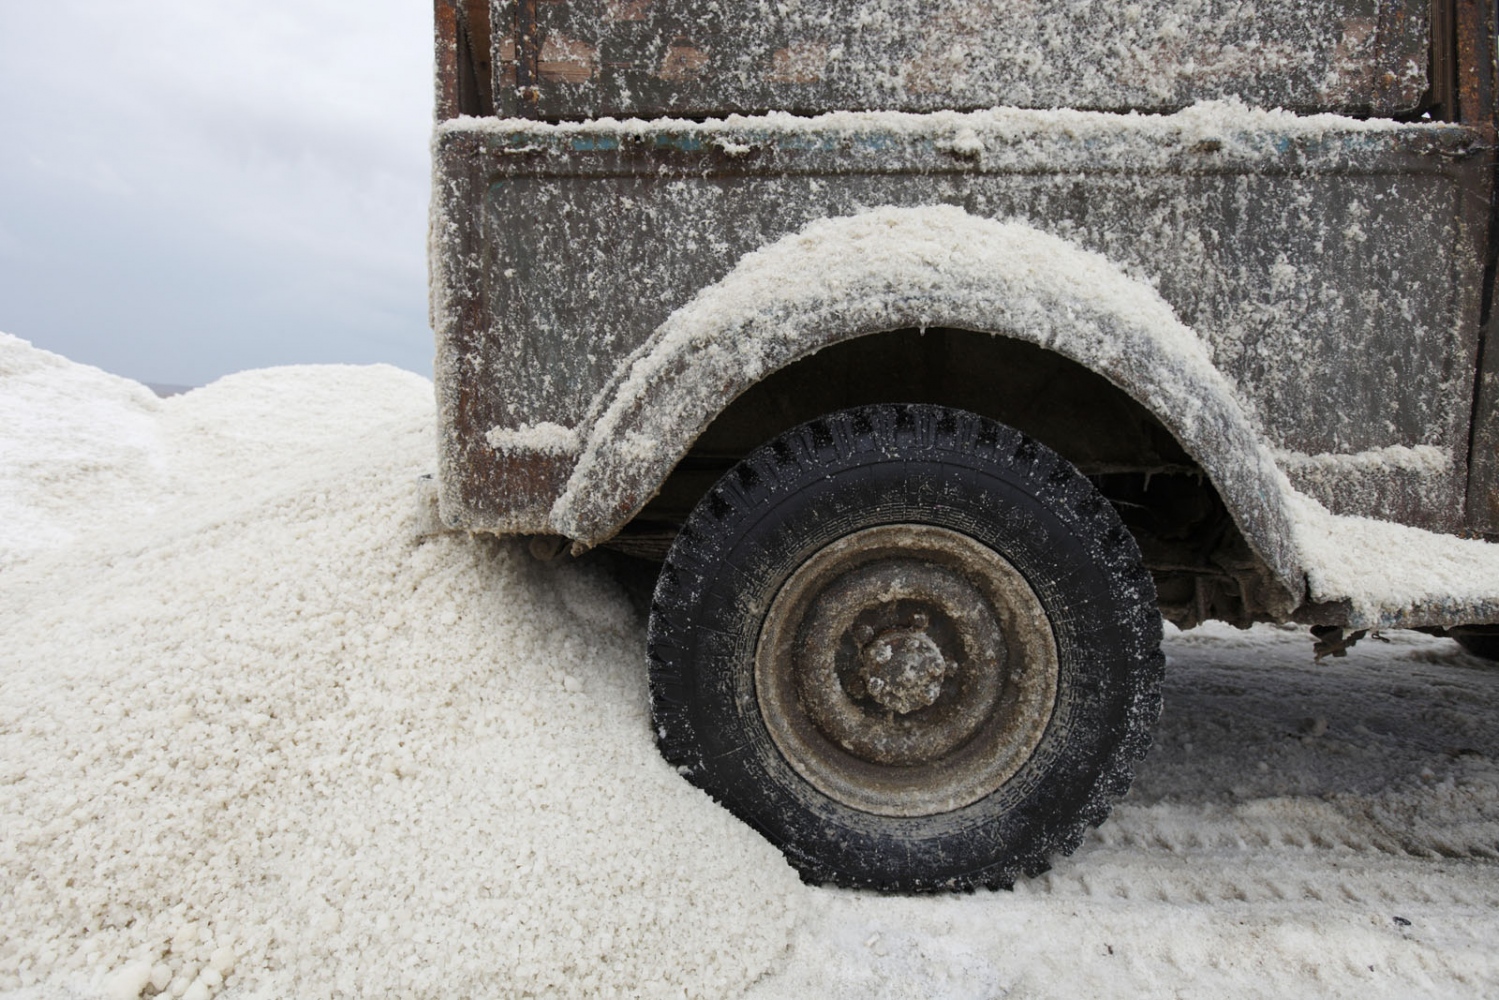 SALT - An old Soviet-era truck is used to transport salt from...